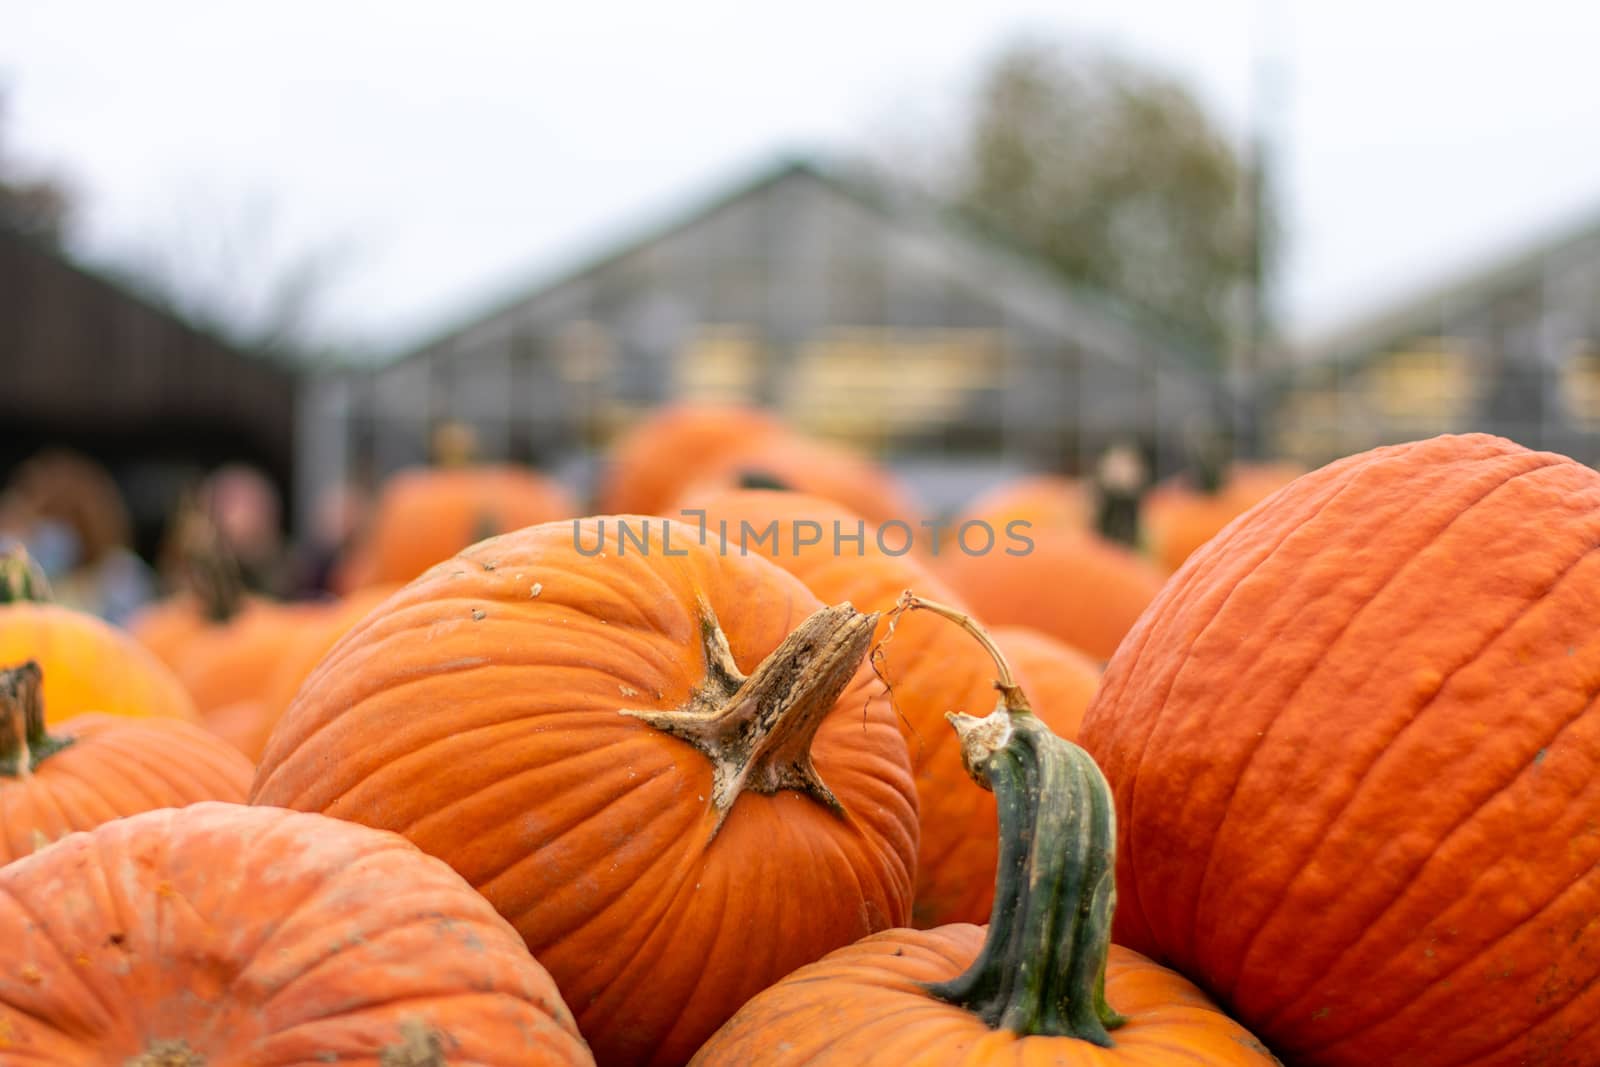 A Pile of Large Orange Pumpkins at a Farmer's Market With a Gree by bju12290